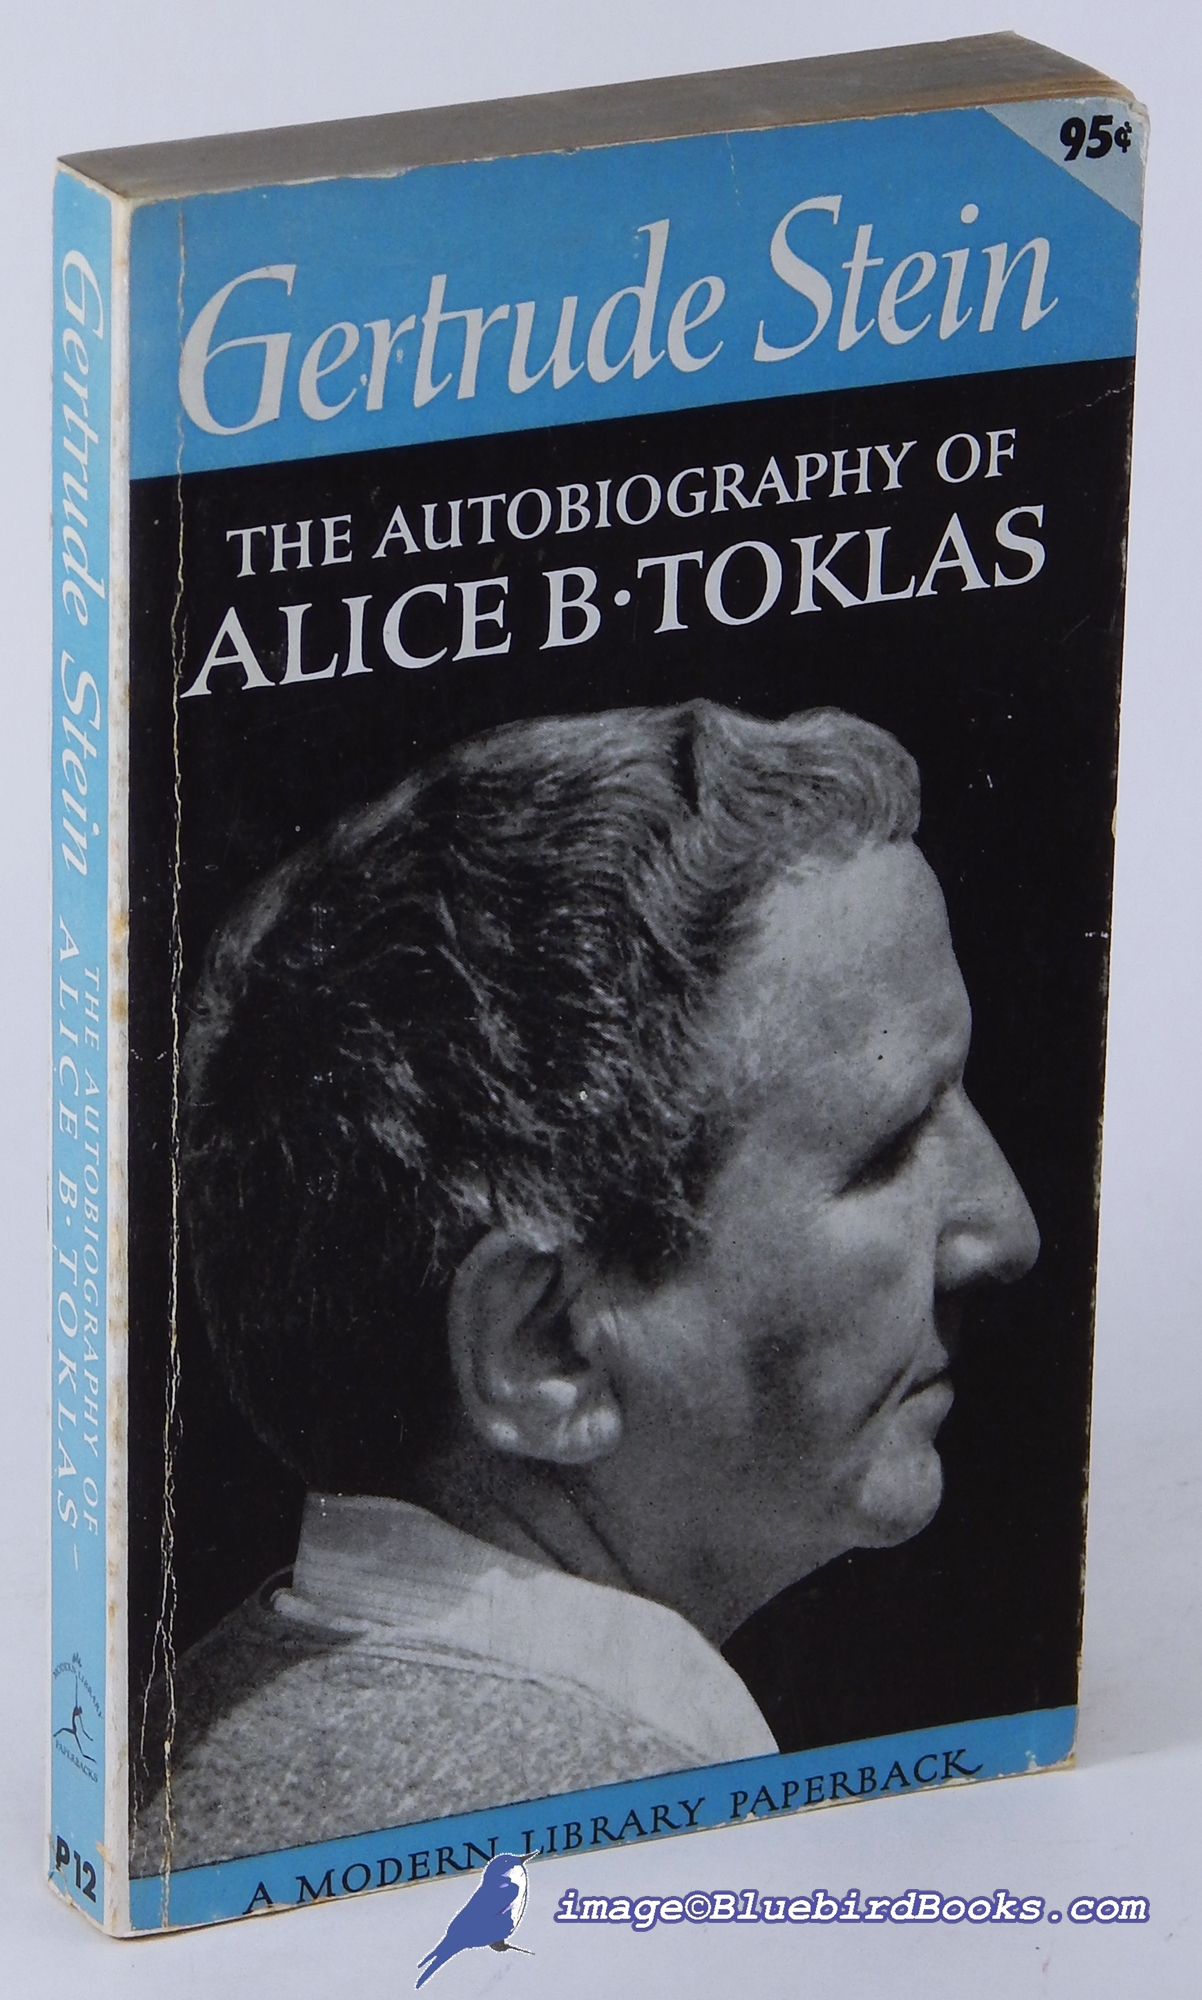 STEIN, GERTRUDE - The Autobiography of Alice B. Toklas (Modern Library Paperback Series, #P12)